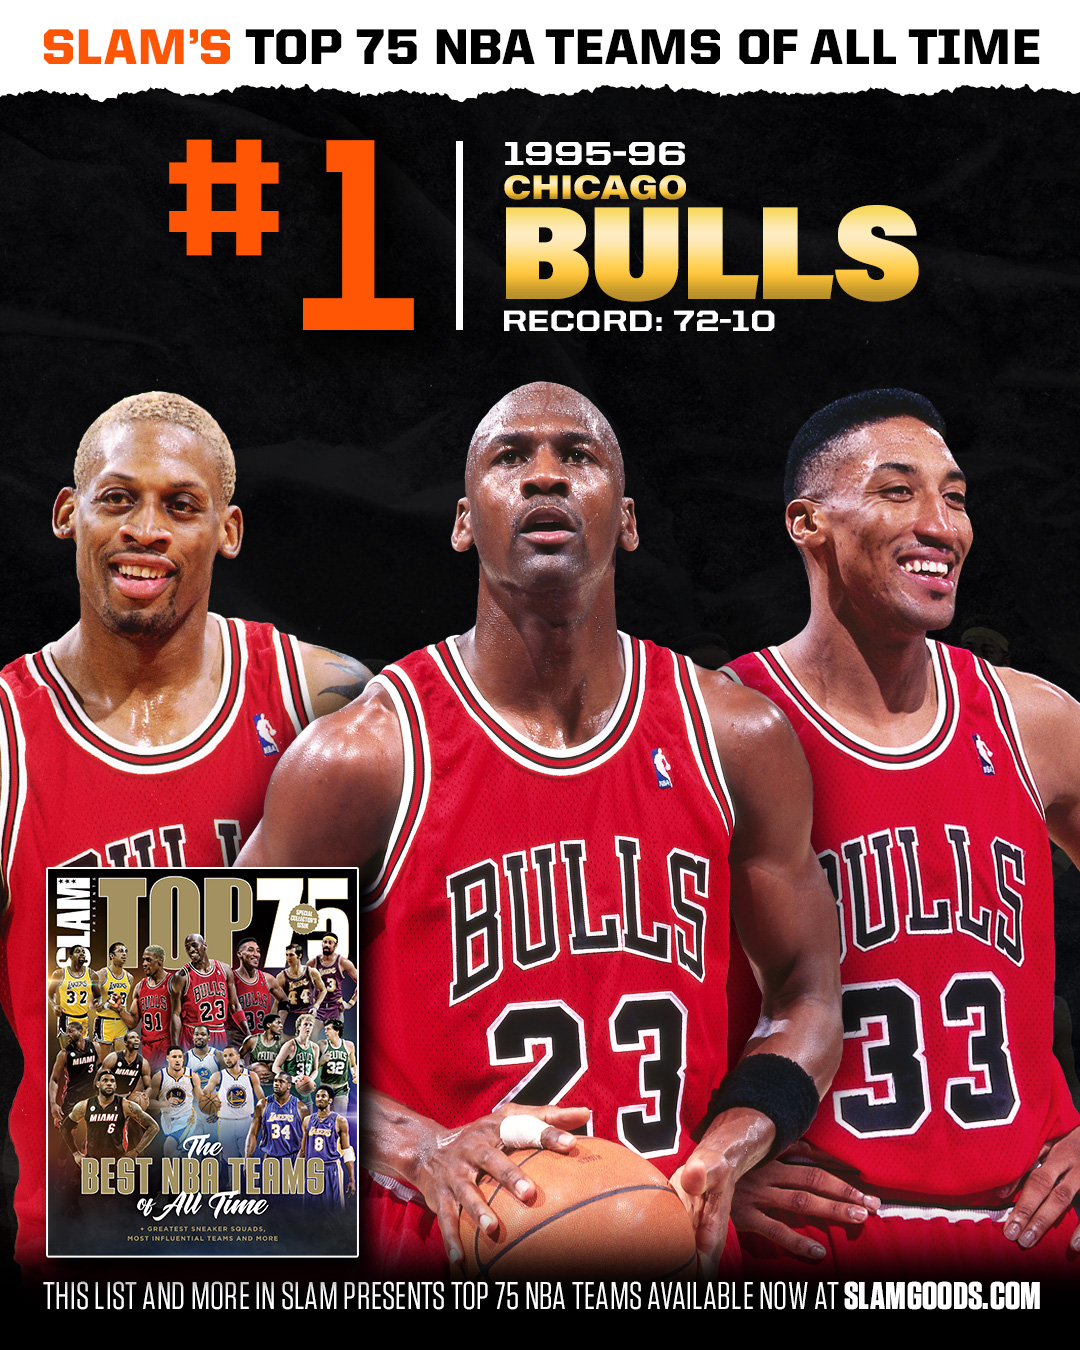 SLAM Presents the Top 75 NBA Players of All-Time is OUT NOW!